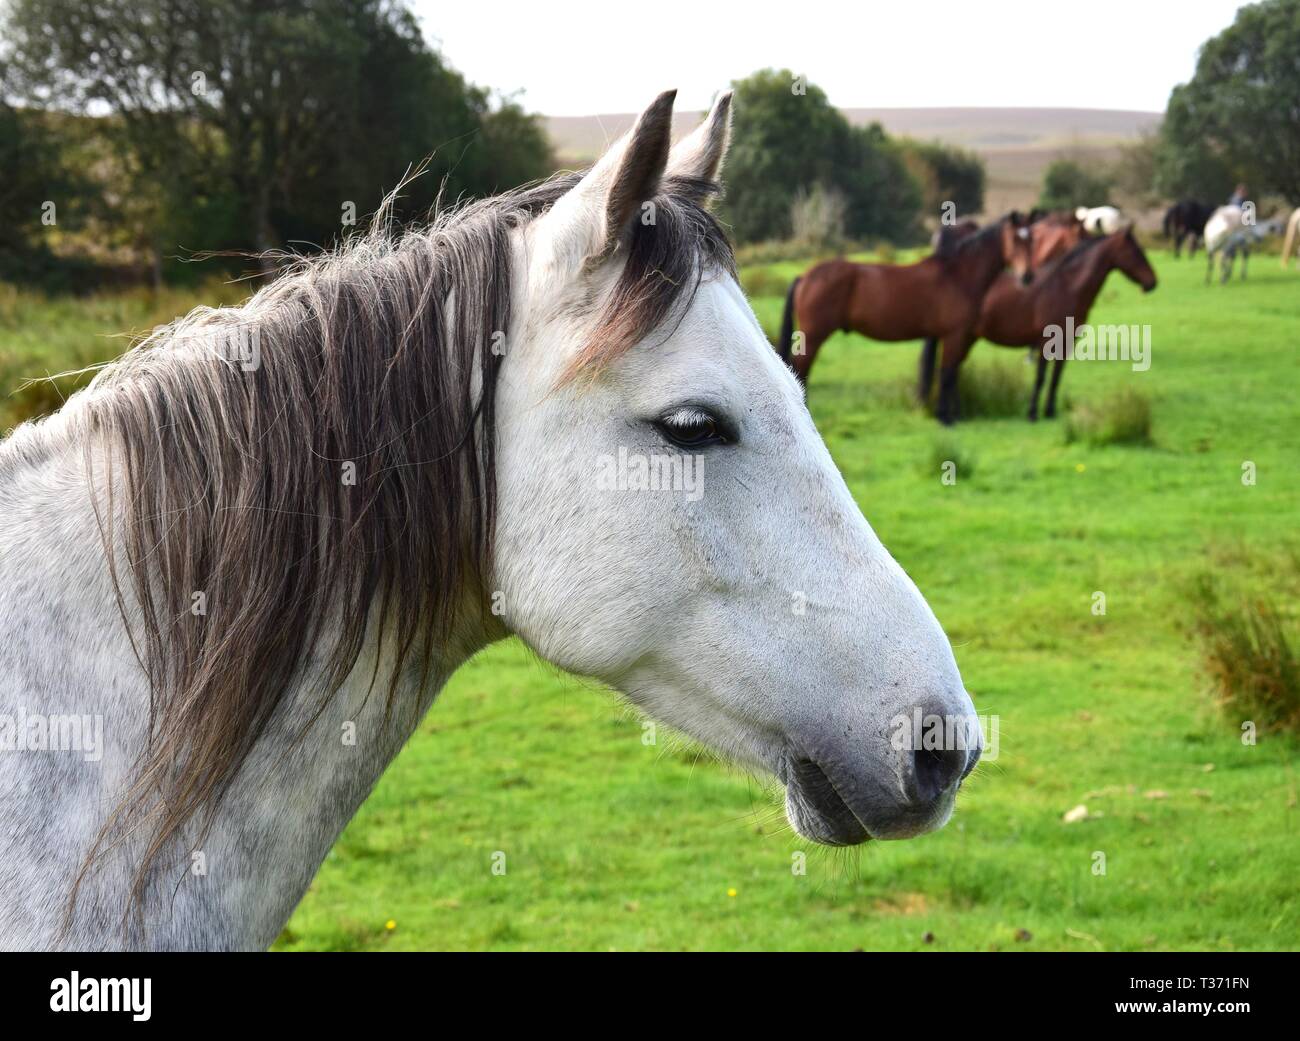 Portrait of a white pony in Ireland. Other horses and landscape in the background. Stock Photo